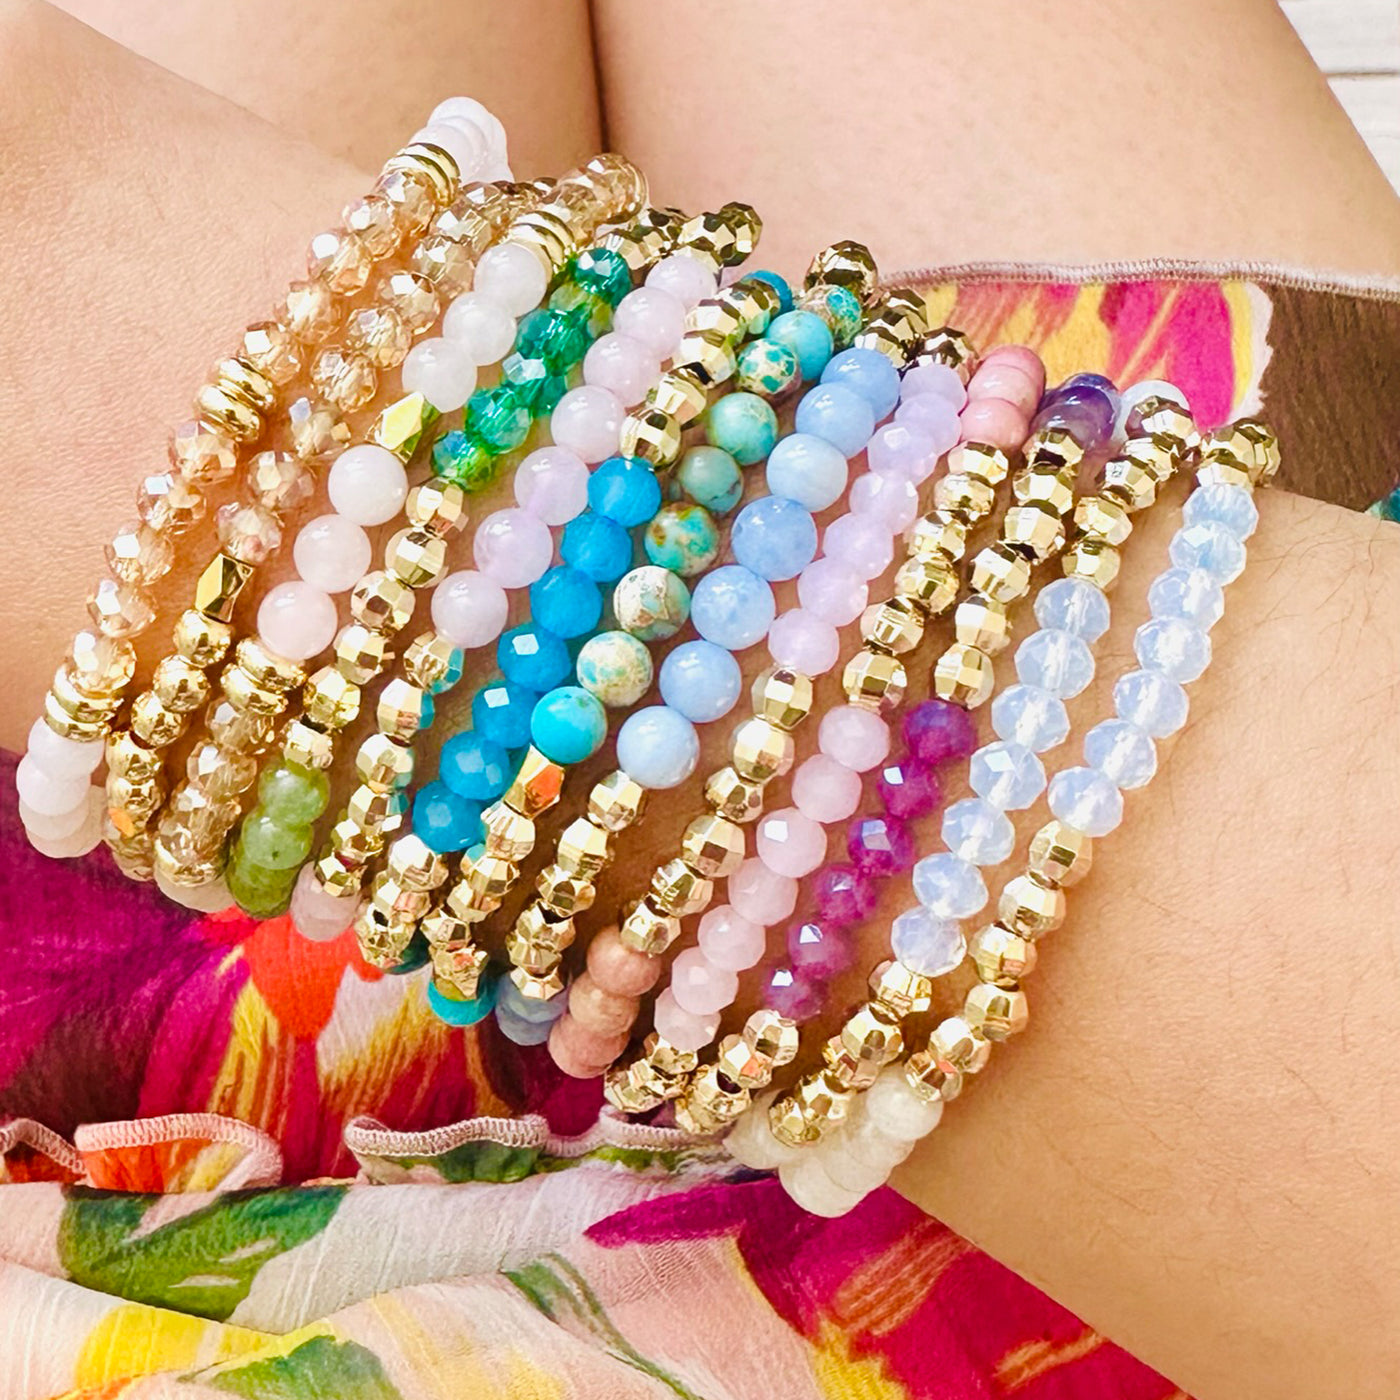 Dainty Healing Crystal Gold Accent Bracelets